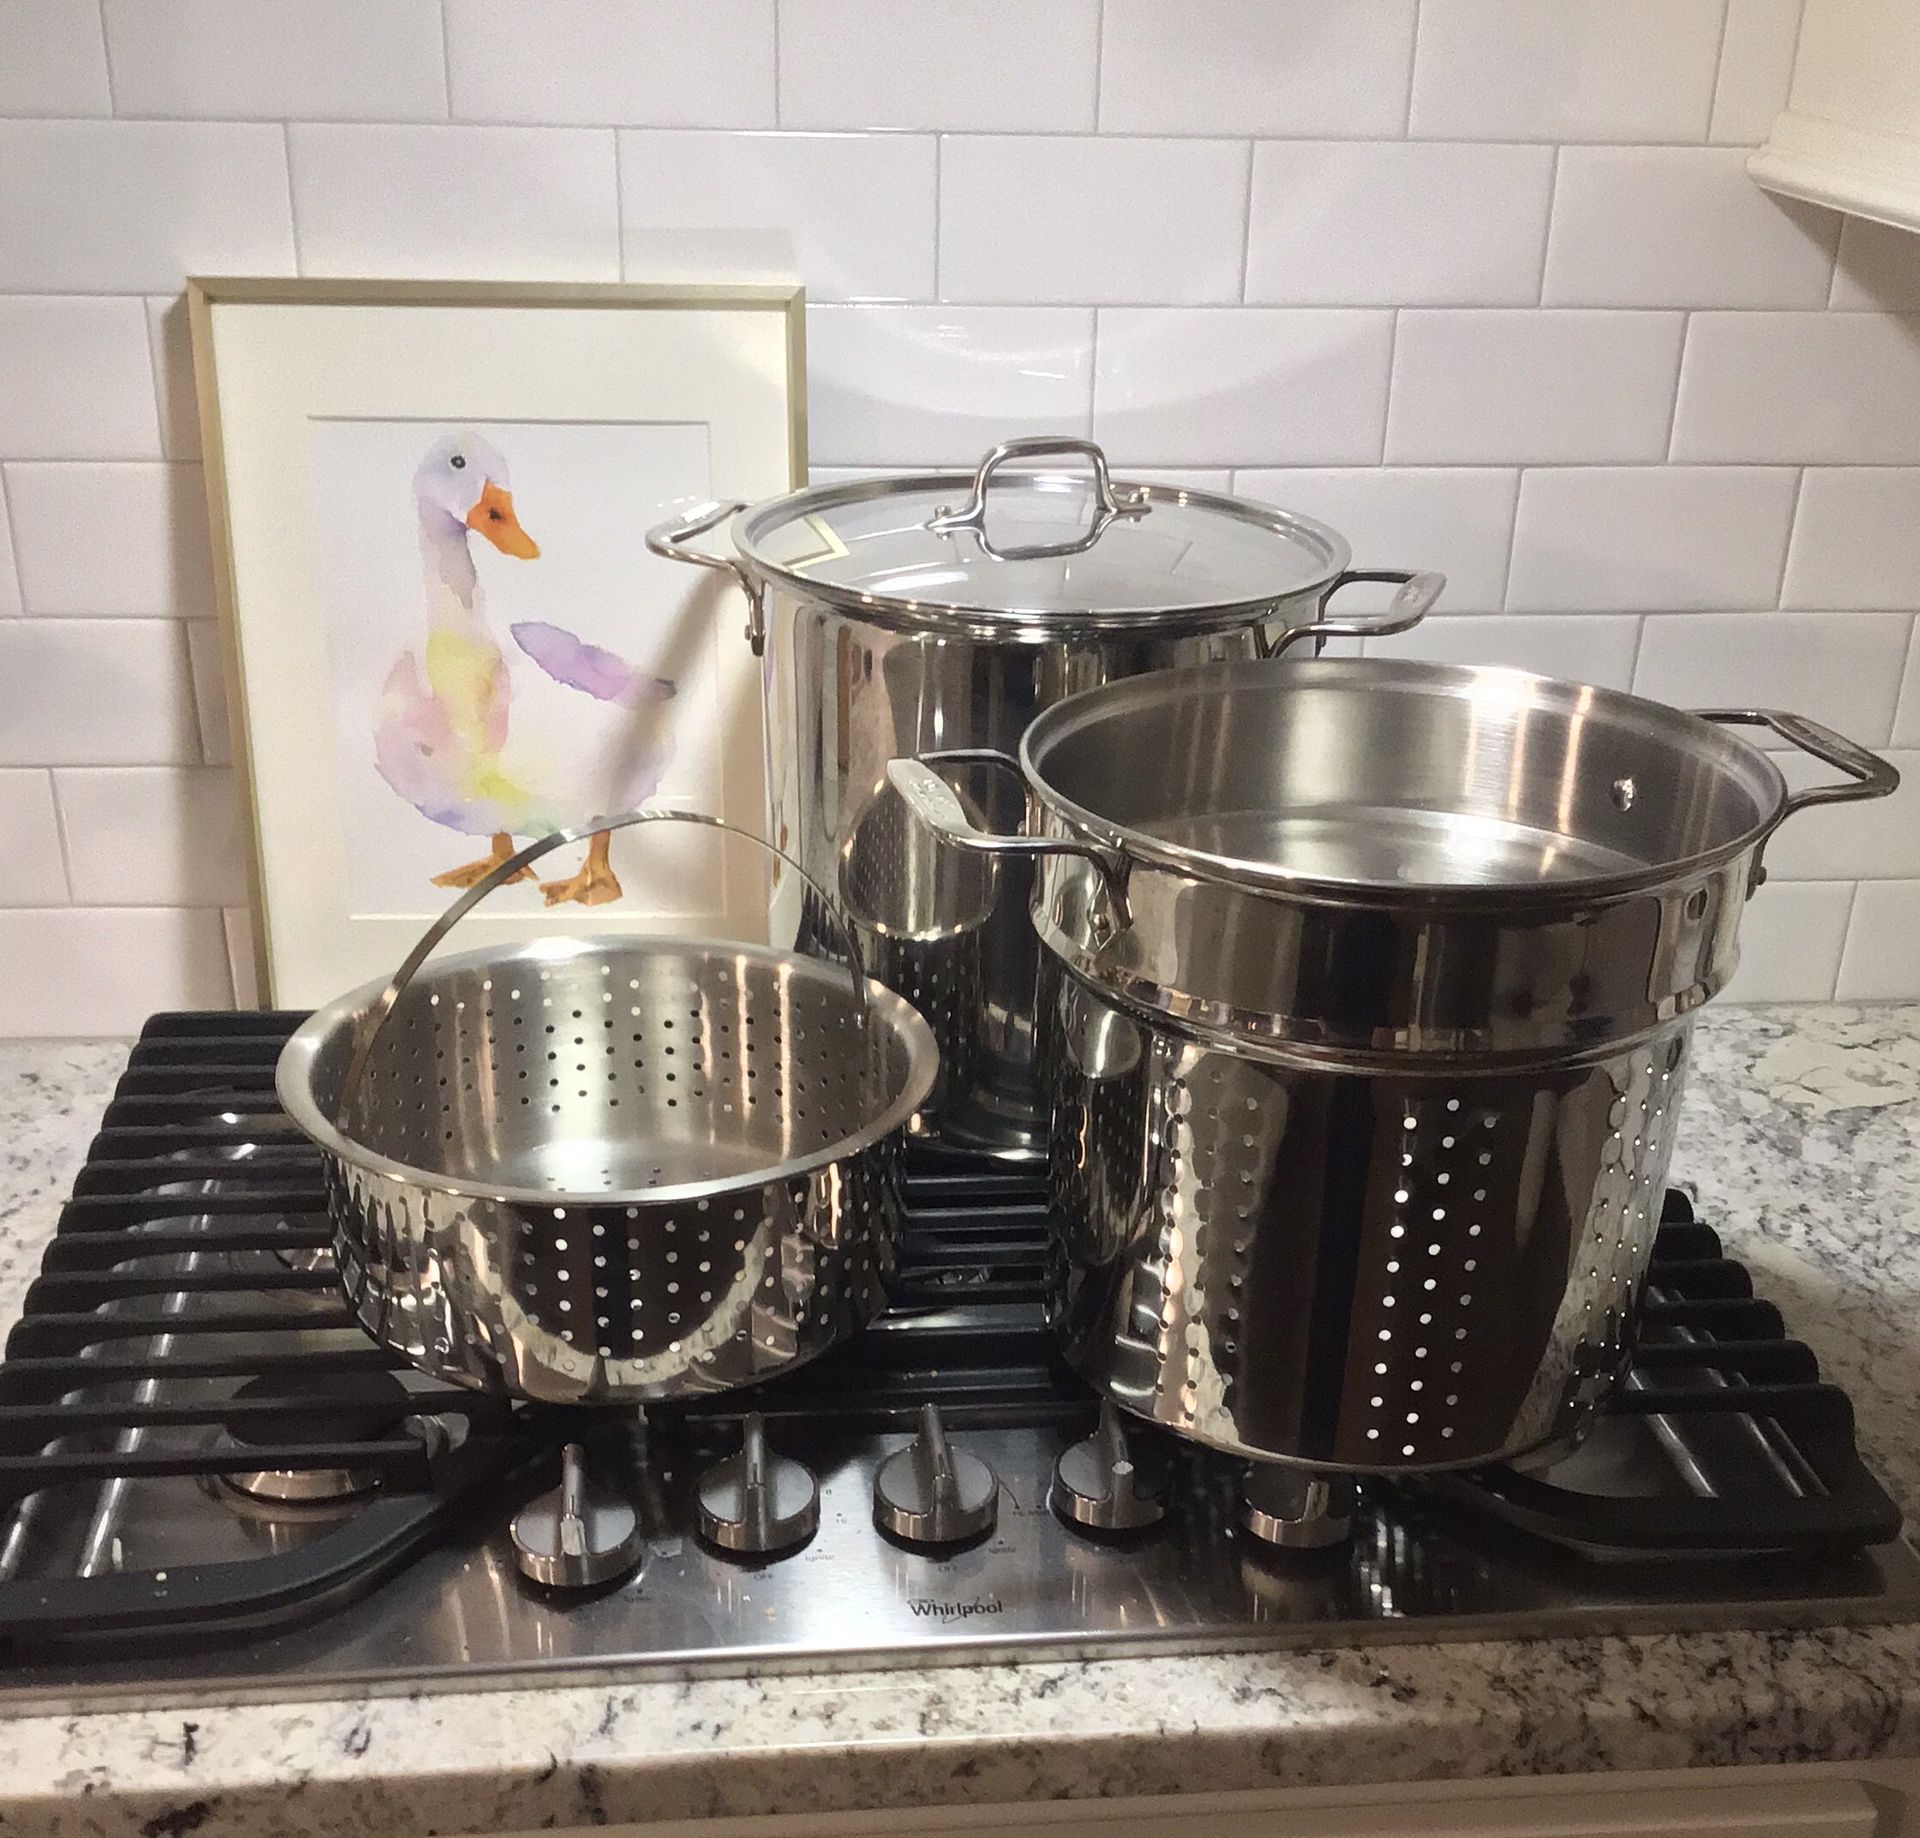 NEW All-Clad Stainless Steel 12 Qt. Covered Multi Pot with Pasta & Steamer Inserts